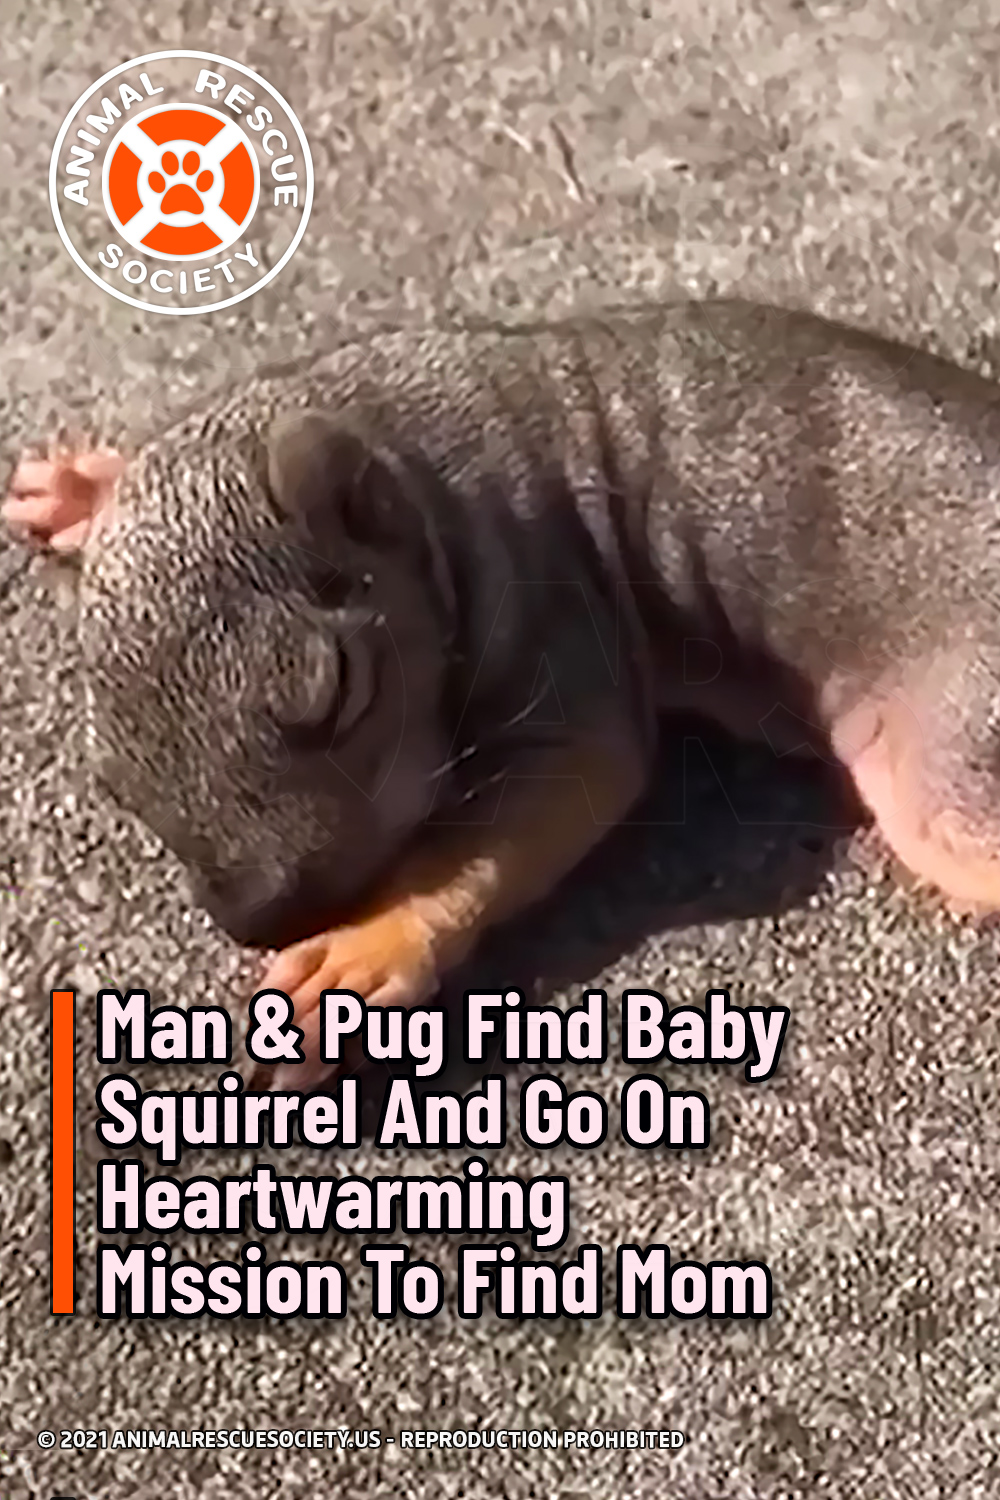 Man & Pug Find Baby Squirrel And Go On Heartwarming Mission To Find Mom